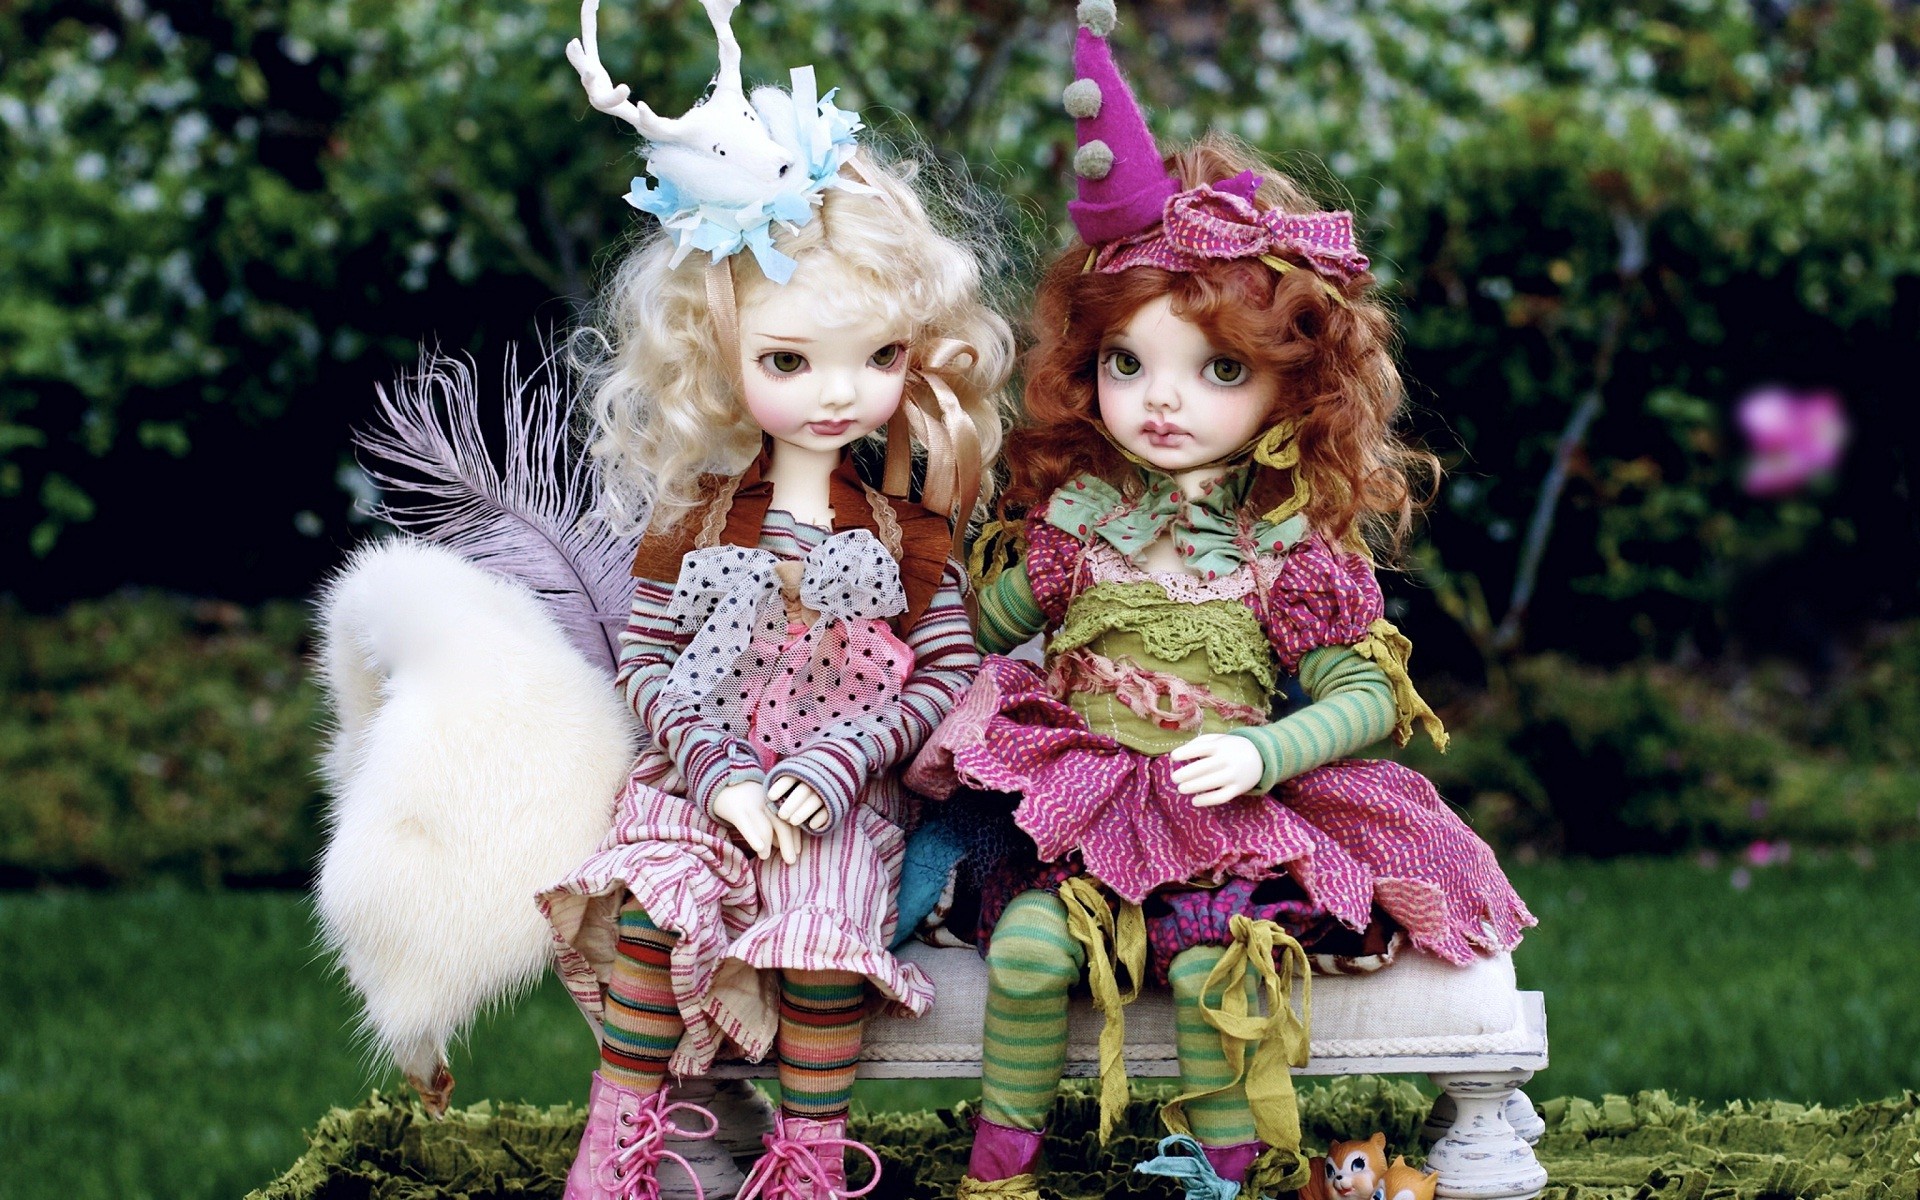 1920x1200 Cute dolls in the park bench beautiful wallpapers.